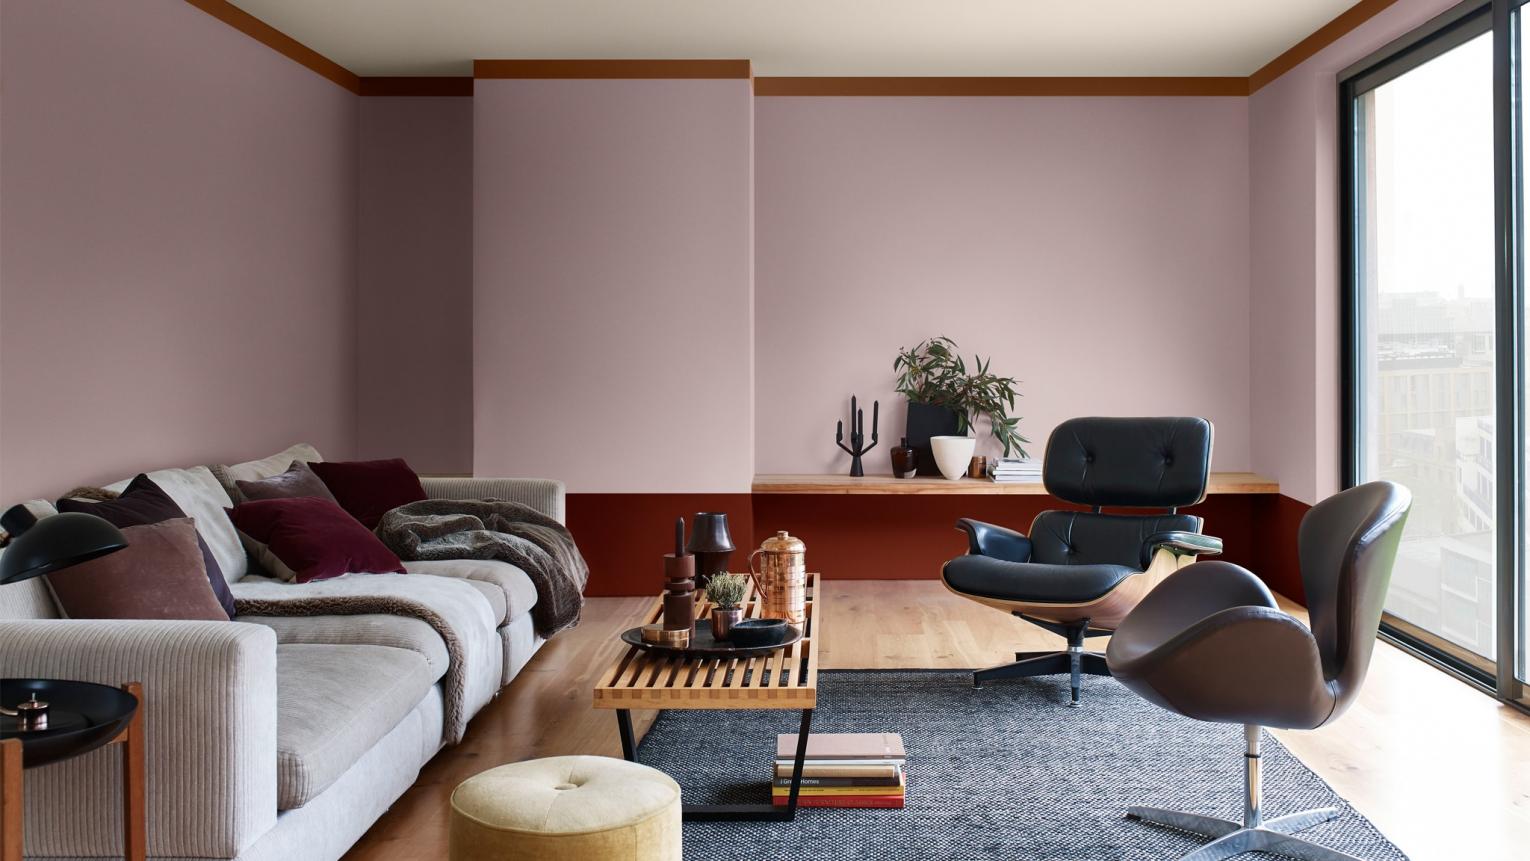 Calming living room featuring soft pink walls with a reddish-brown border.